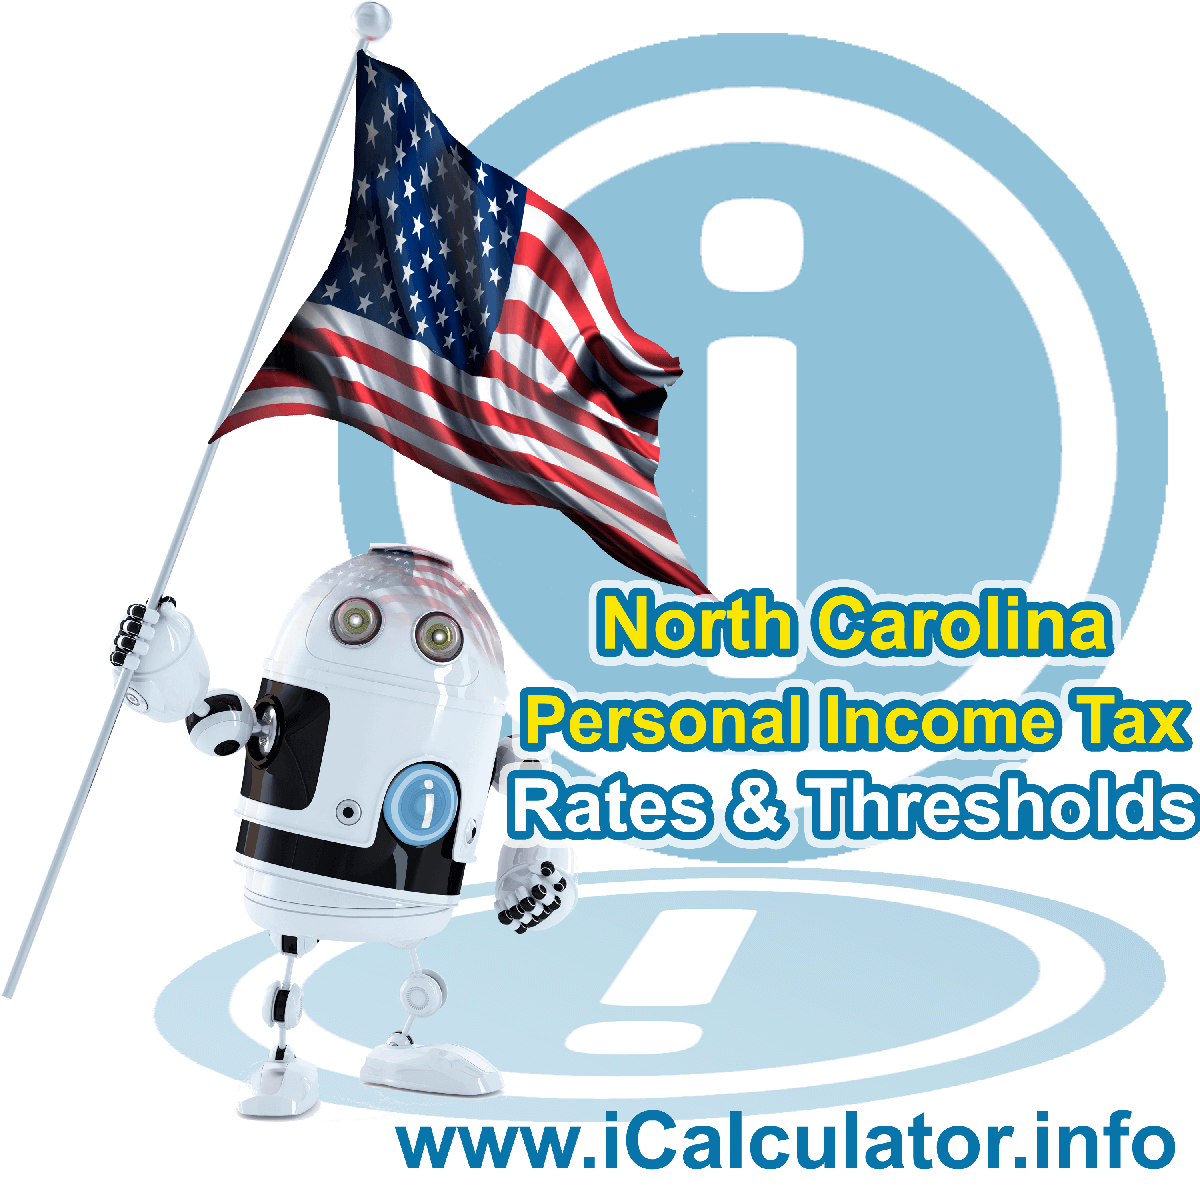 North Carolina State Tax Tables 2021. This image displays details of the North Carolina State Tax Tables for the 2021 tax return year which is provided in support of the 2021 US Tax Calculator